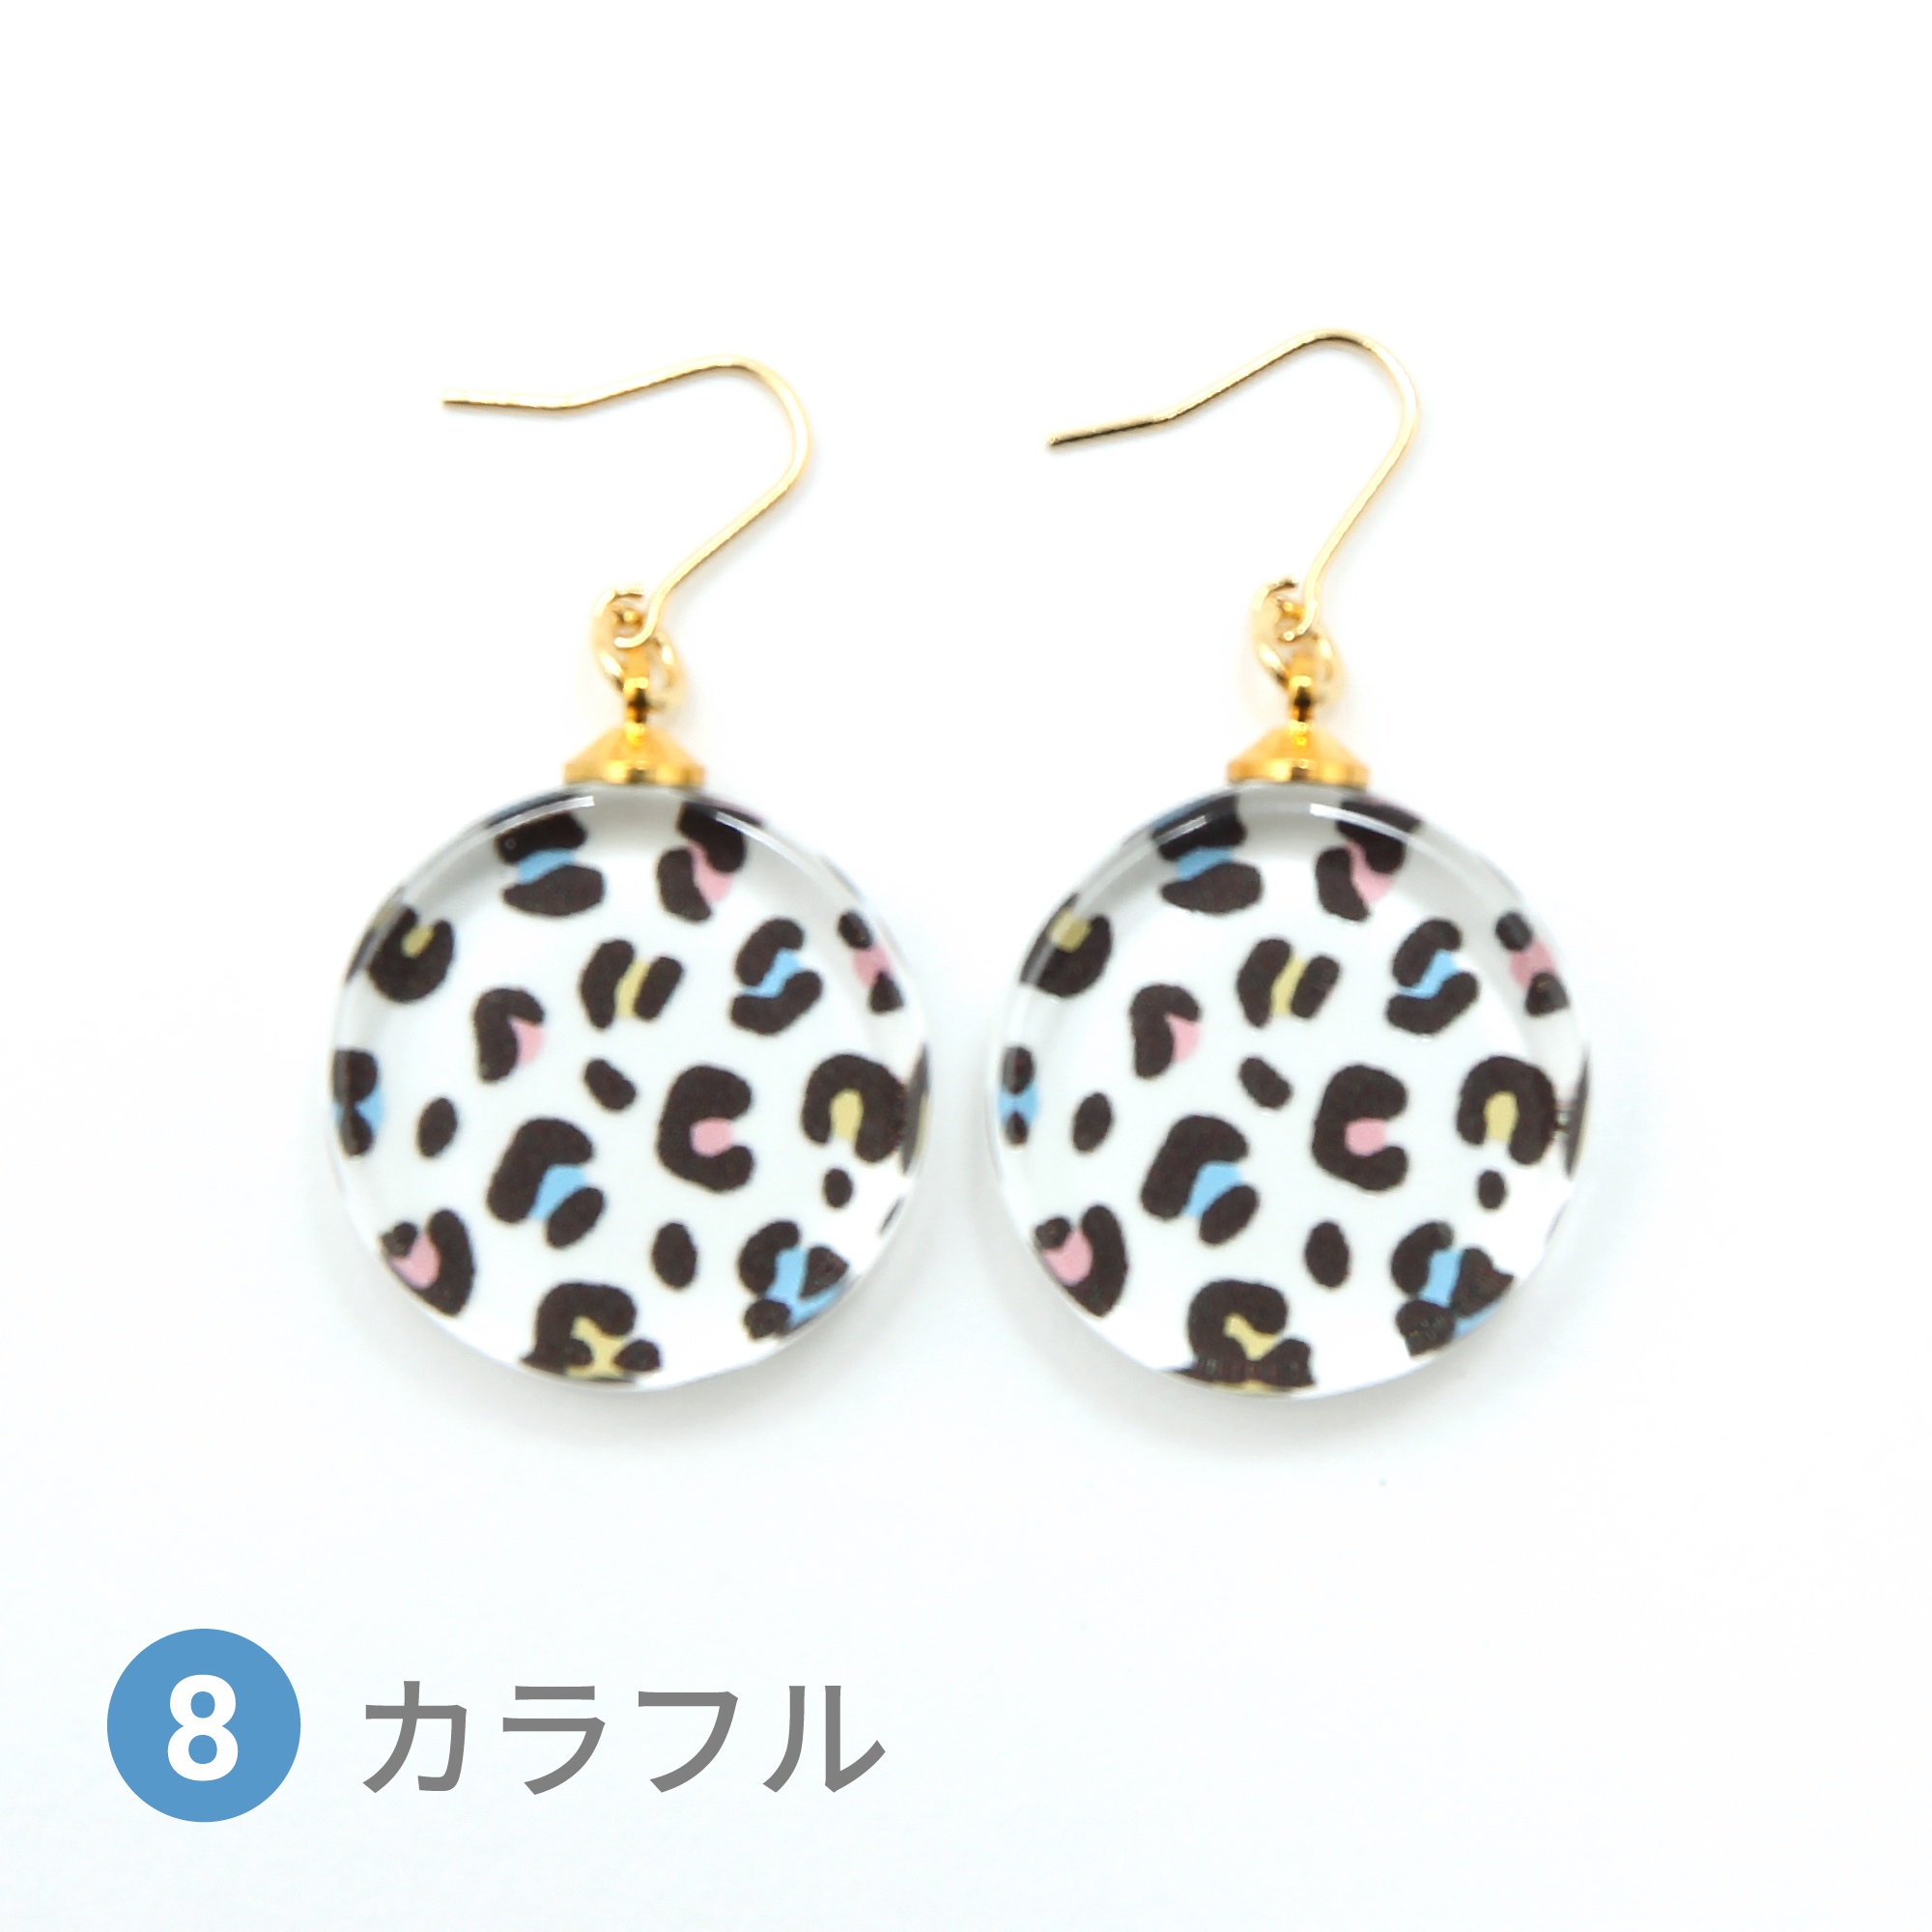 Glass accessories Pierced Earring LEOPARD colorful round shape